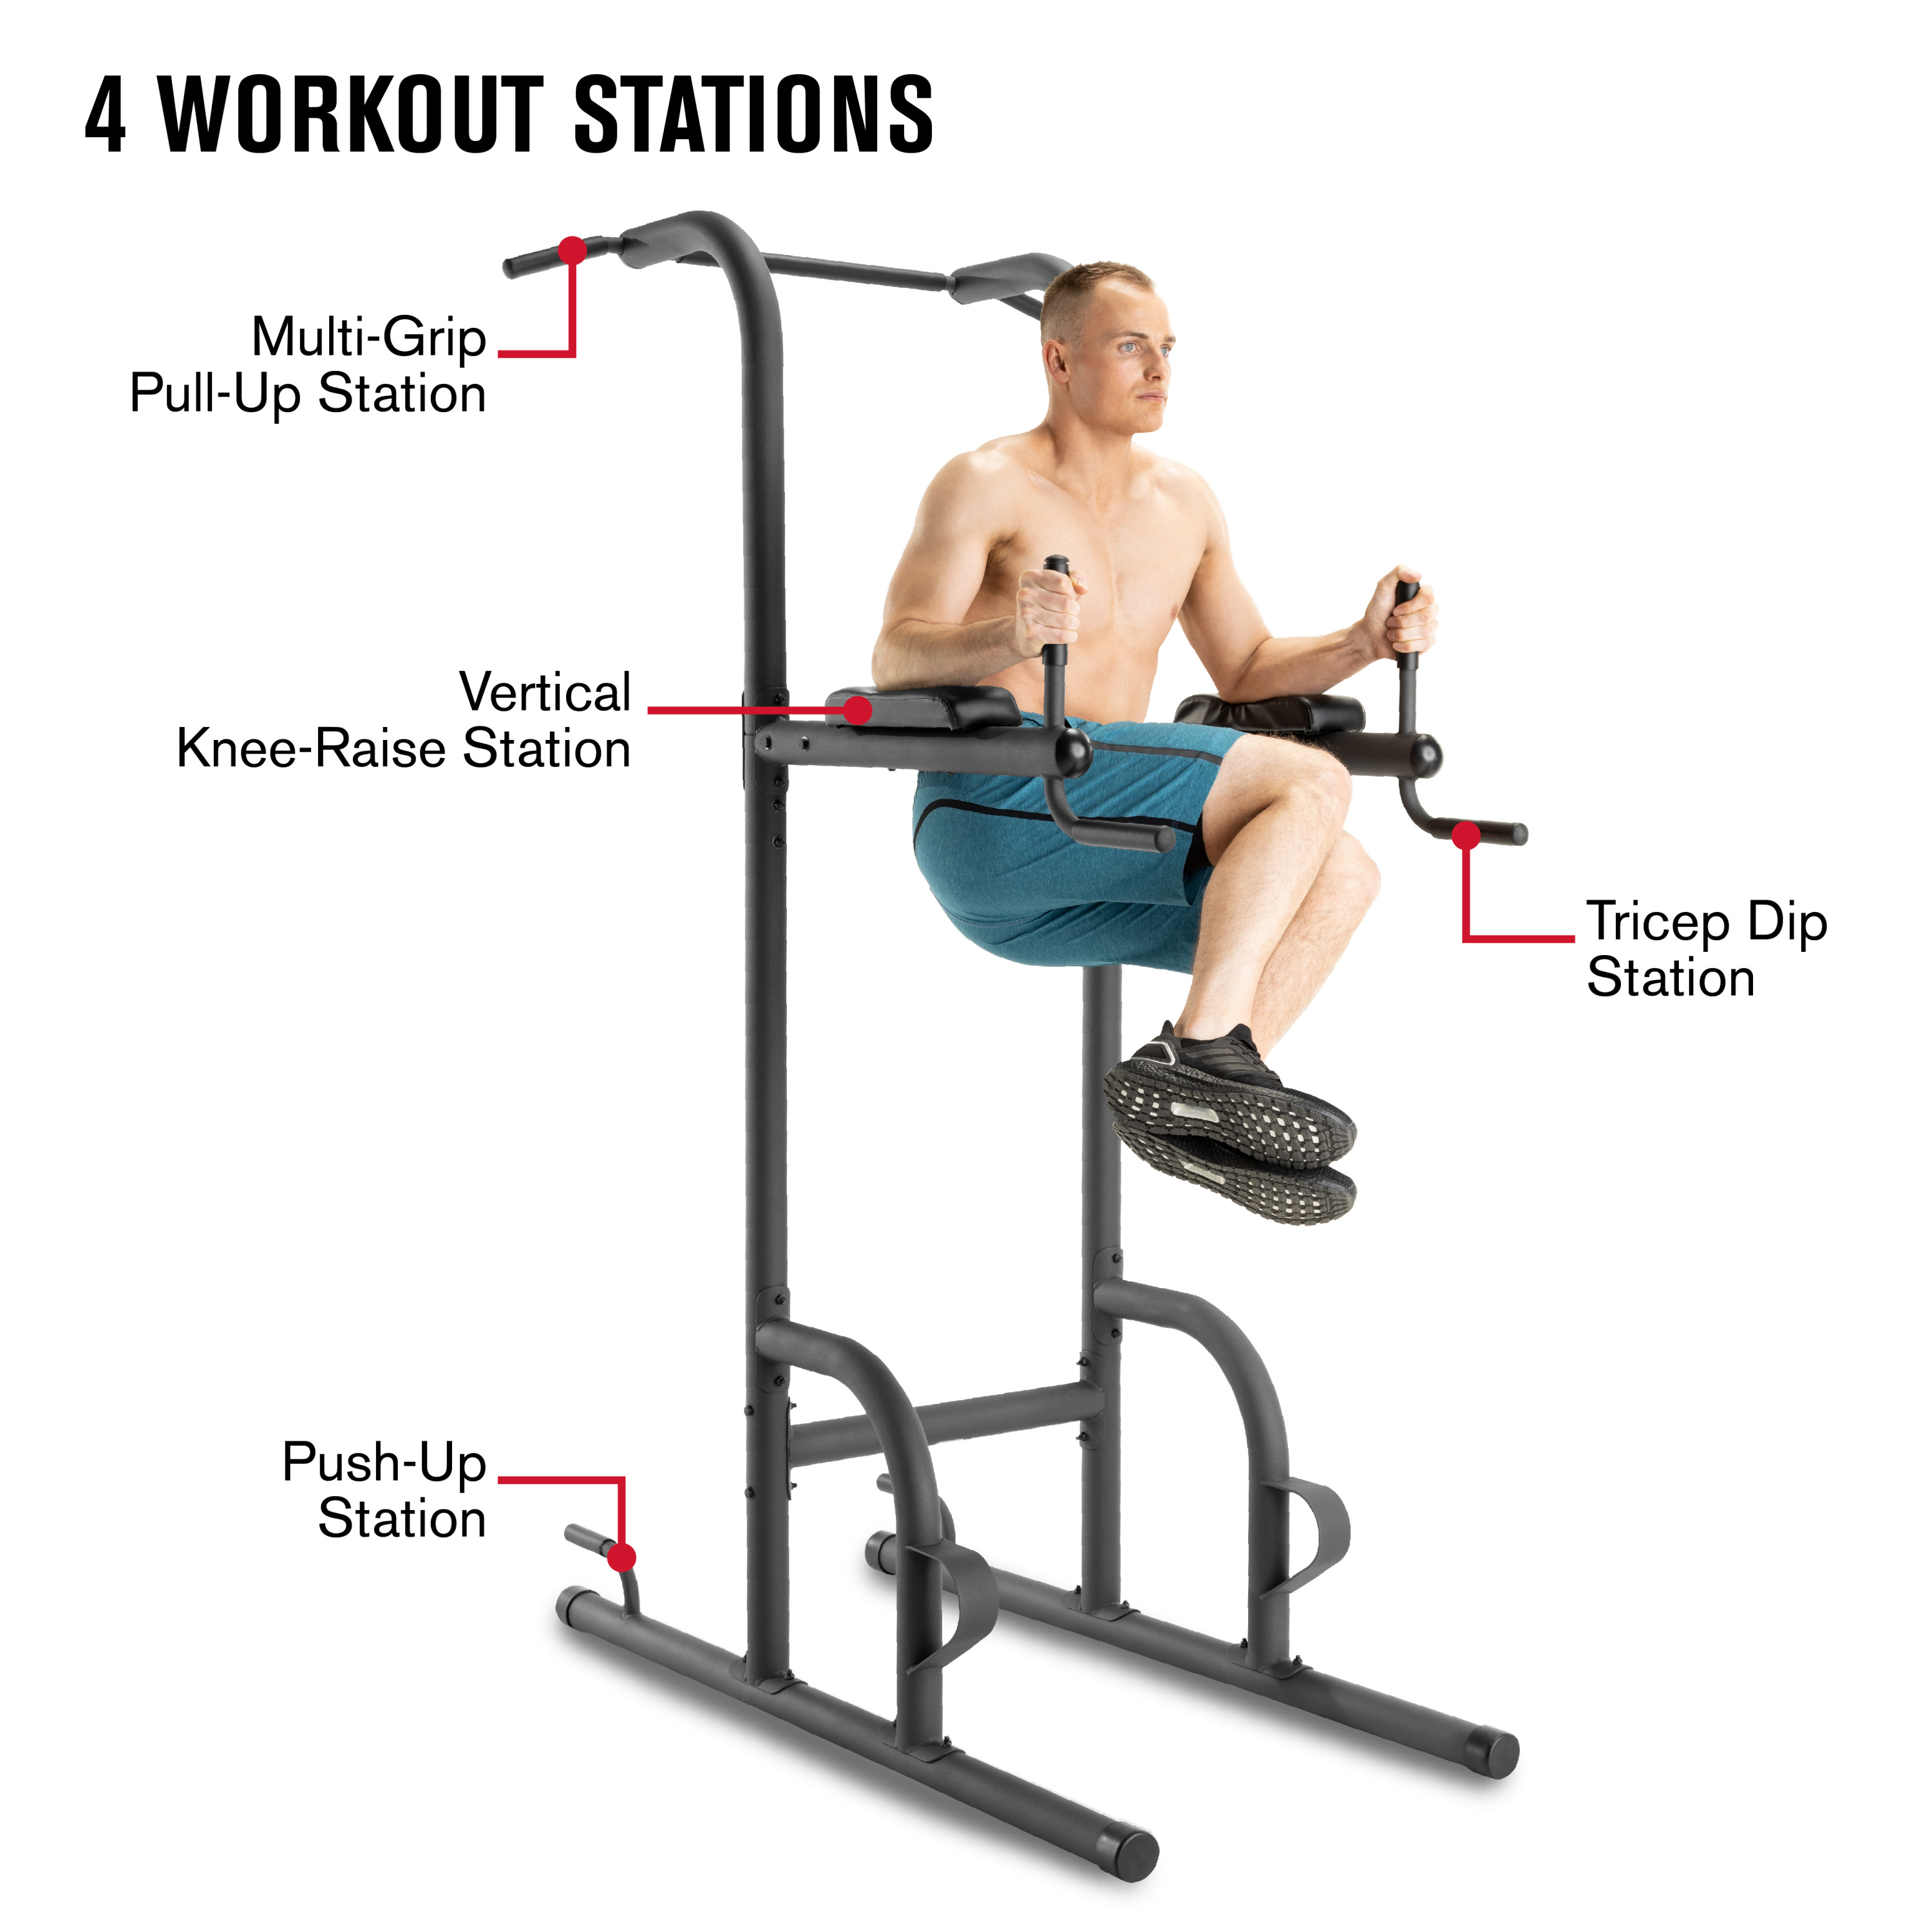 Weider Power Tower with Four Workout Stations and 300 lb. User Capacity - image 4 of 29